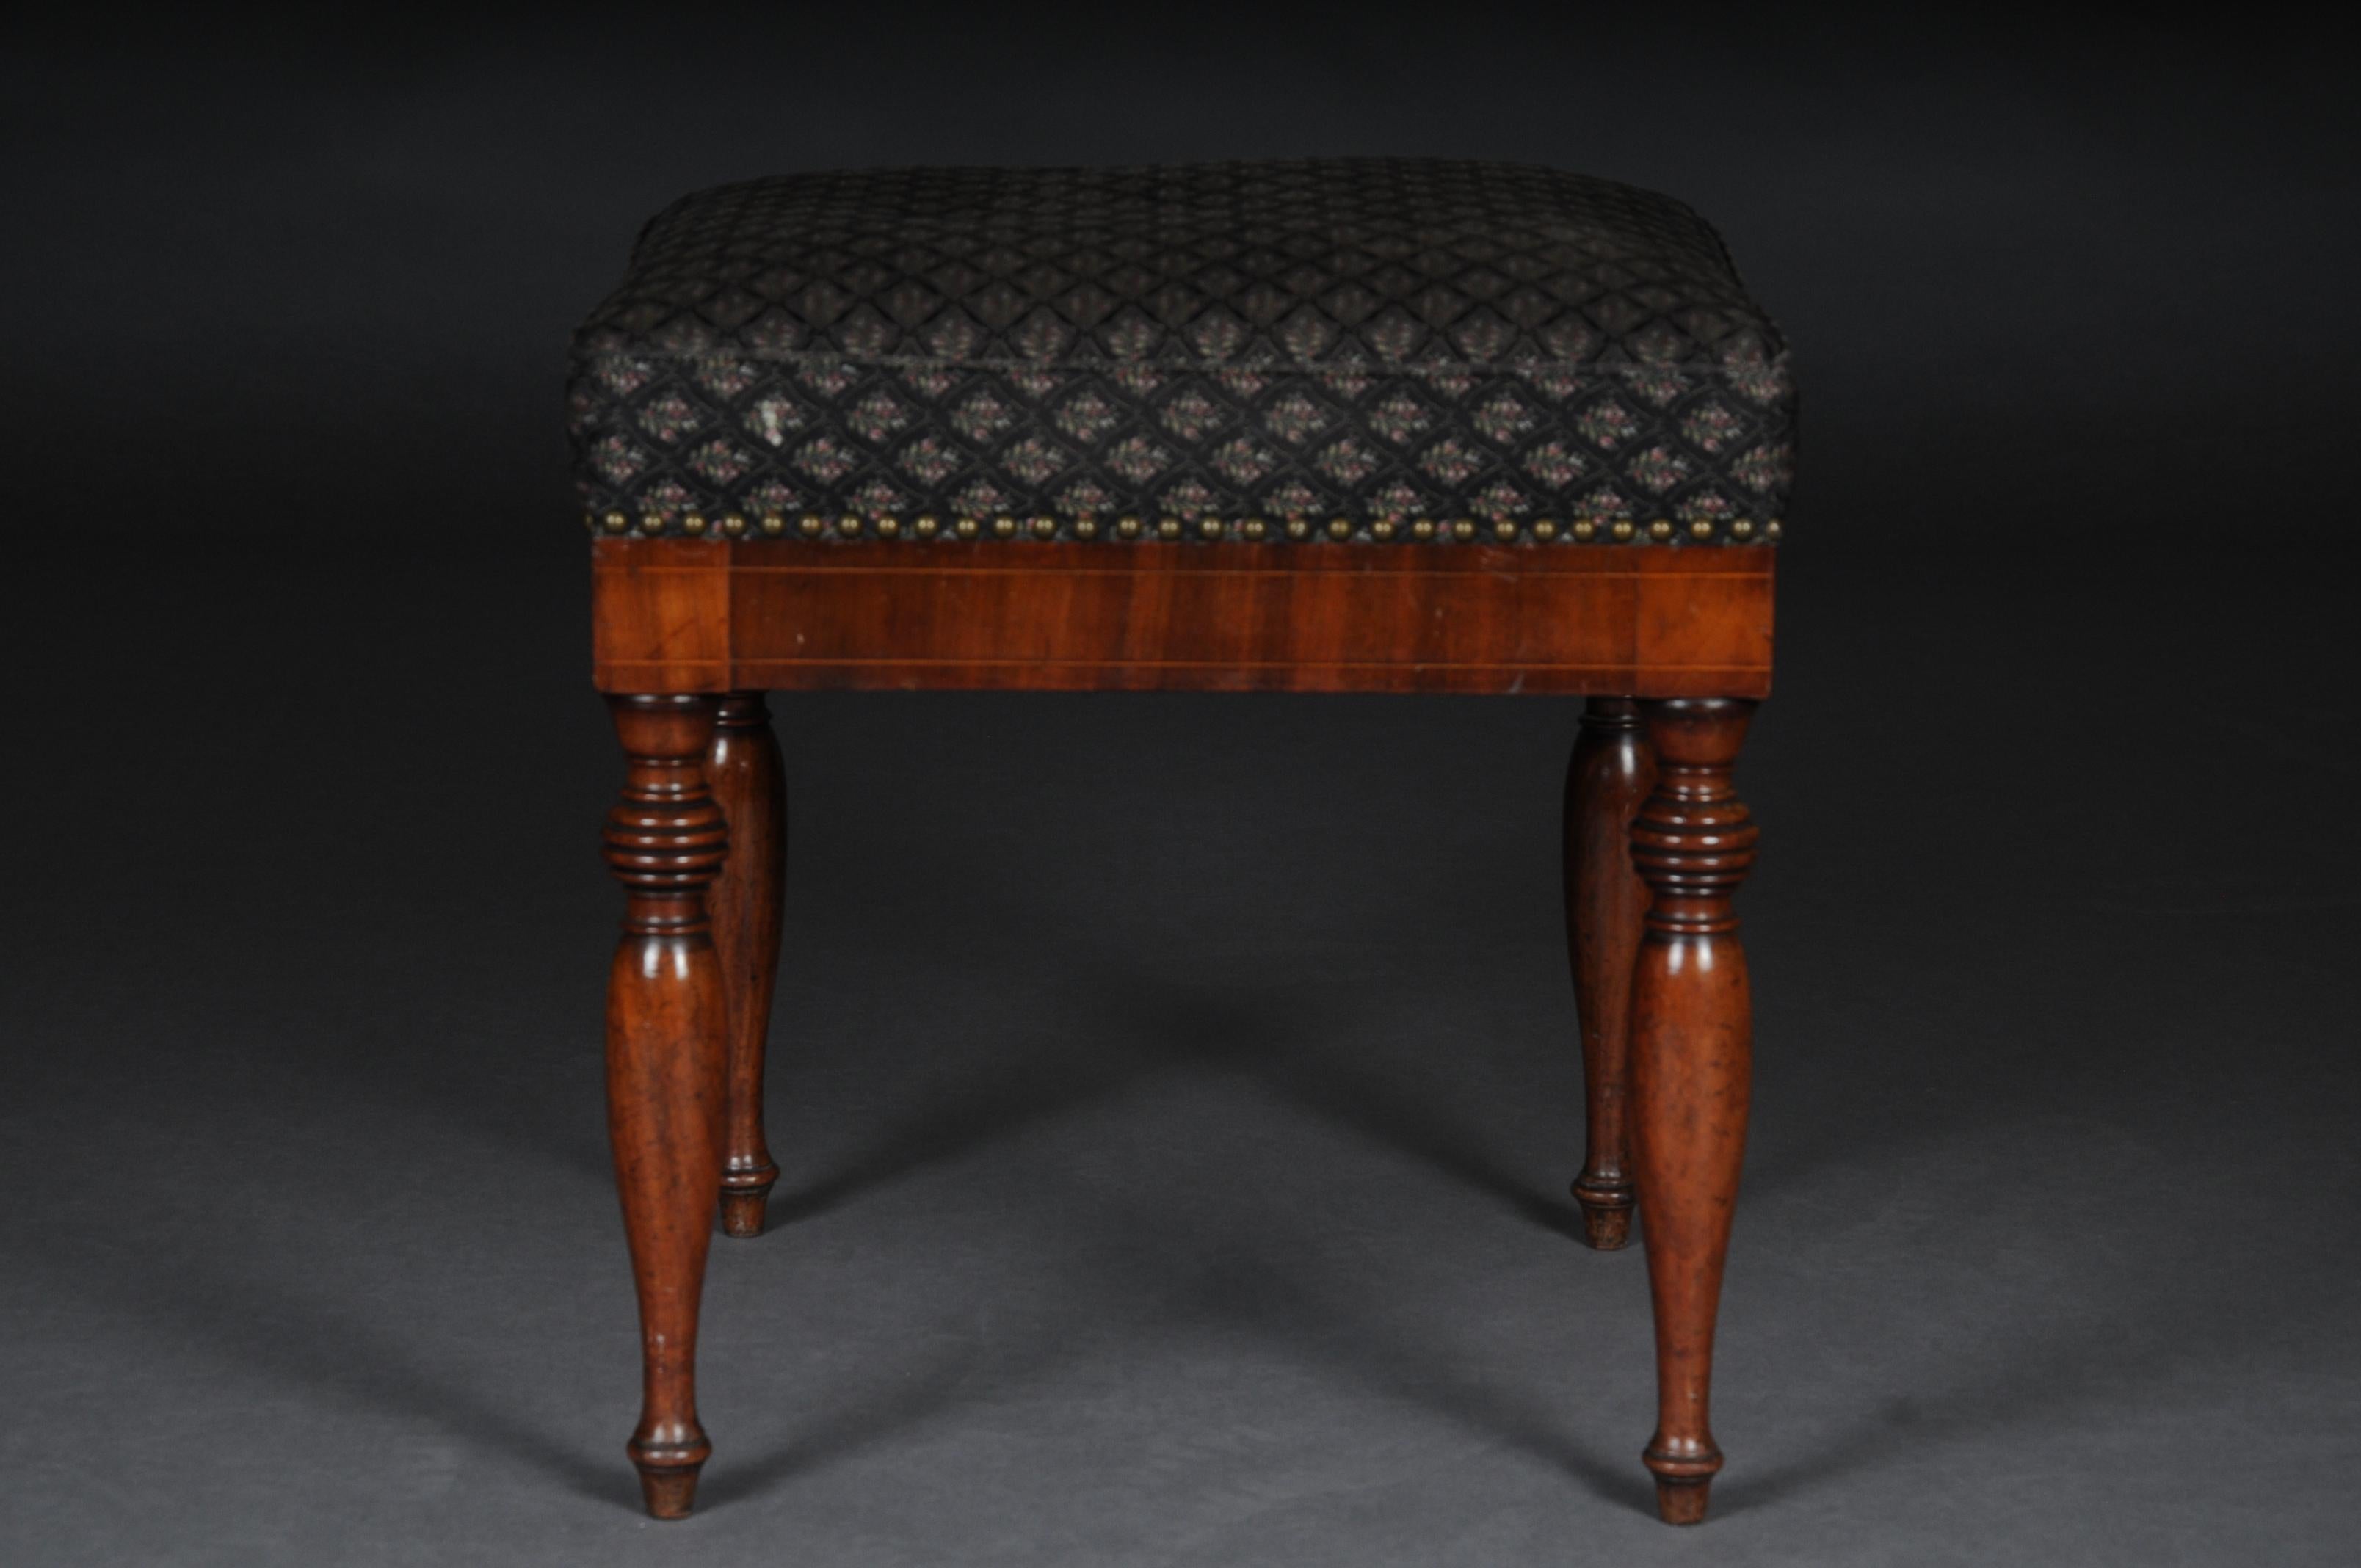 Biedermeier stool after K. F. Schinkel, circa 1825

Mahogany squares on solid wood. Straight frame on baluster feet.
Seat is finished with a historic, classic upholstery.

(B - 157)
Measures: Sh 47 cm.